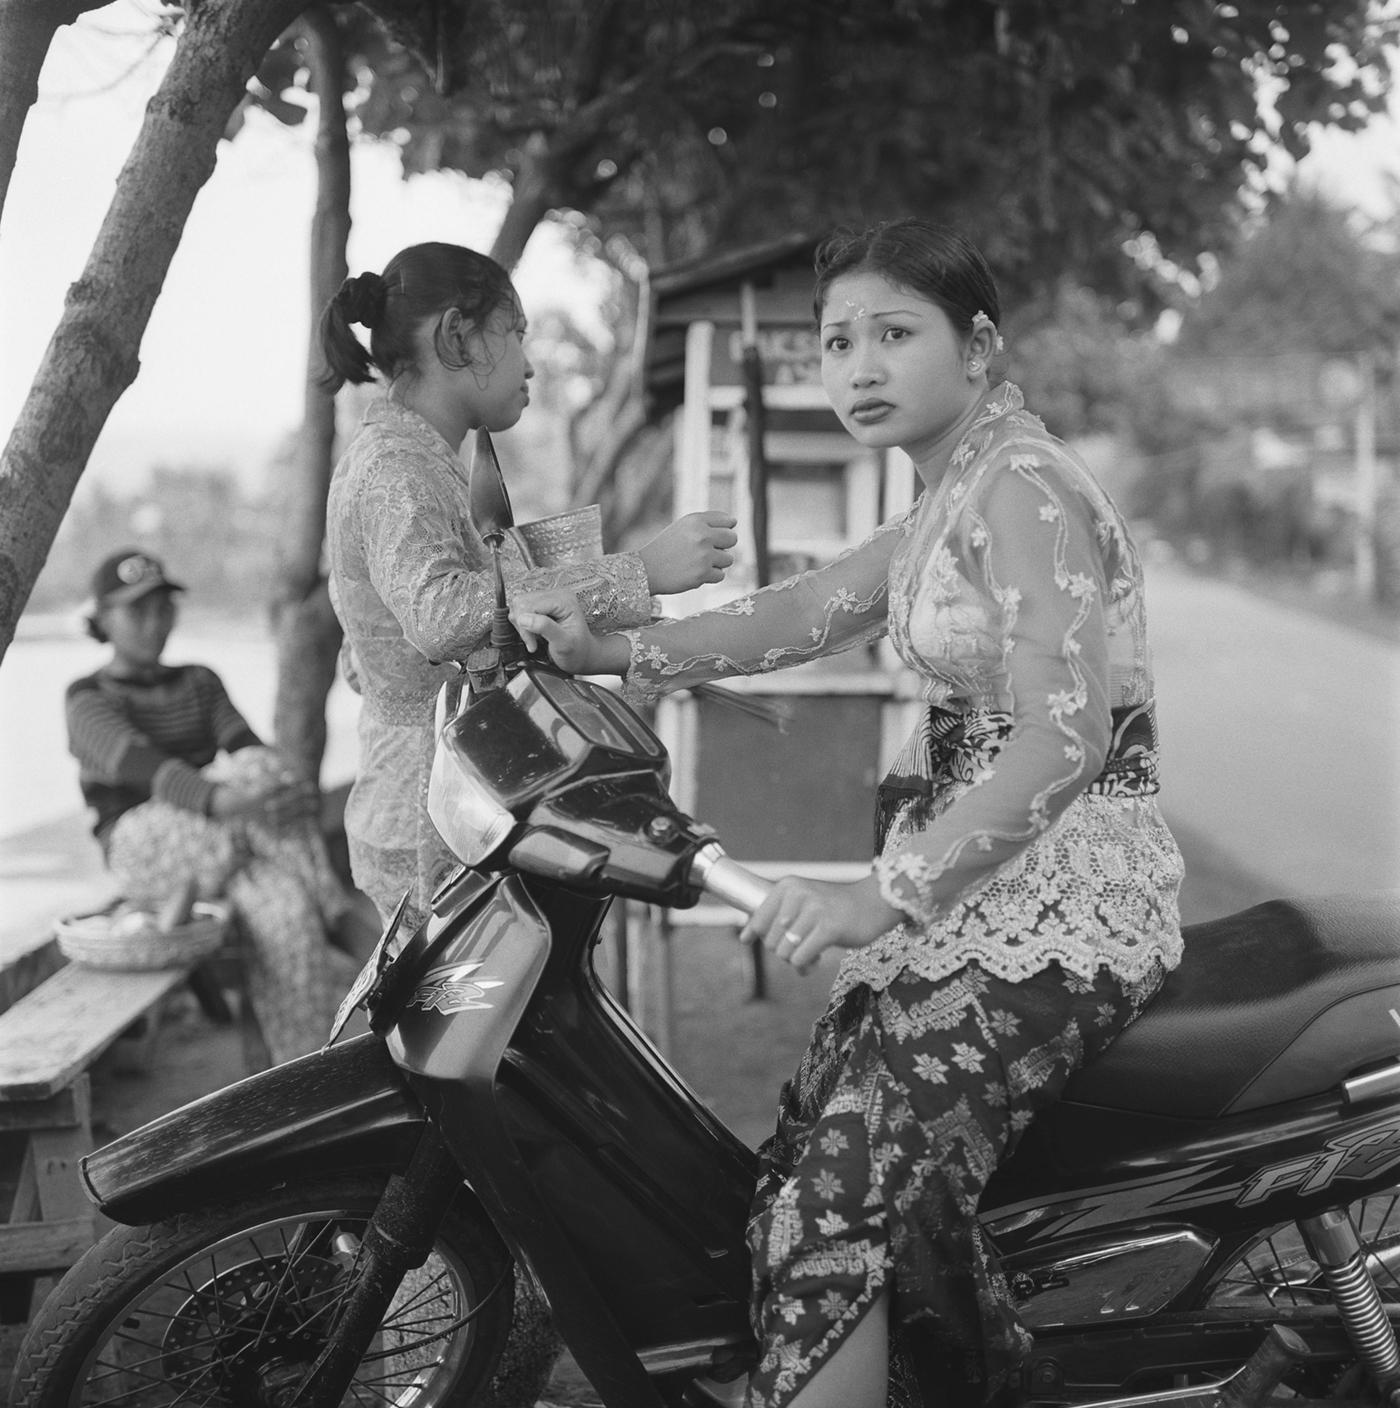 Justin Creedy Smith Black and White Photograph - Balinese Motorbike Girls - Limited Edition - Oversize print